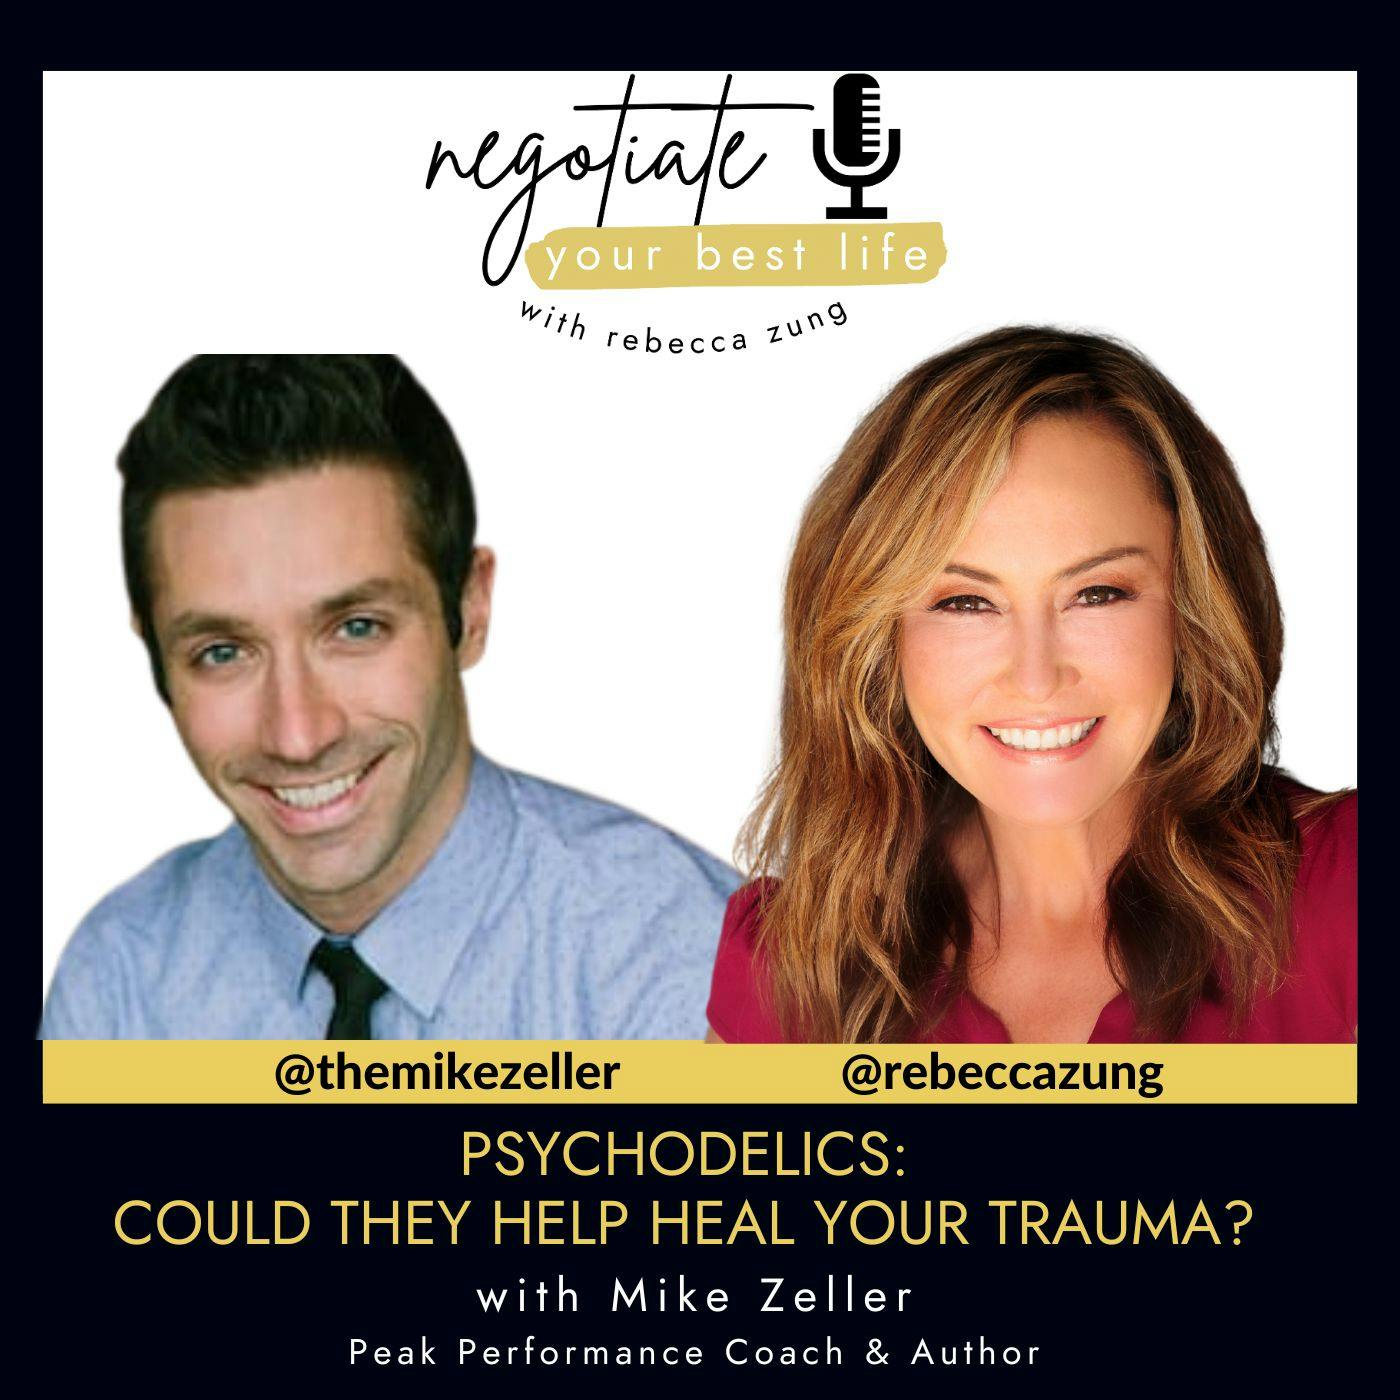 Psychodelics: Could They Help Heal Your Trauma? with Guest MIKE ZELLER  & Rebecca Zung on Negotiate Your Best Life #509